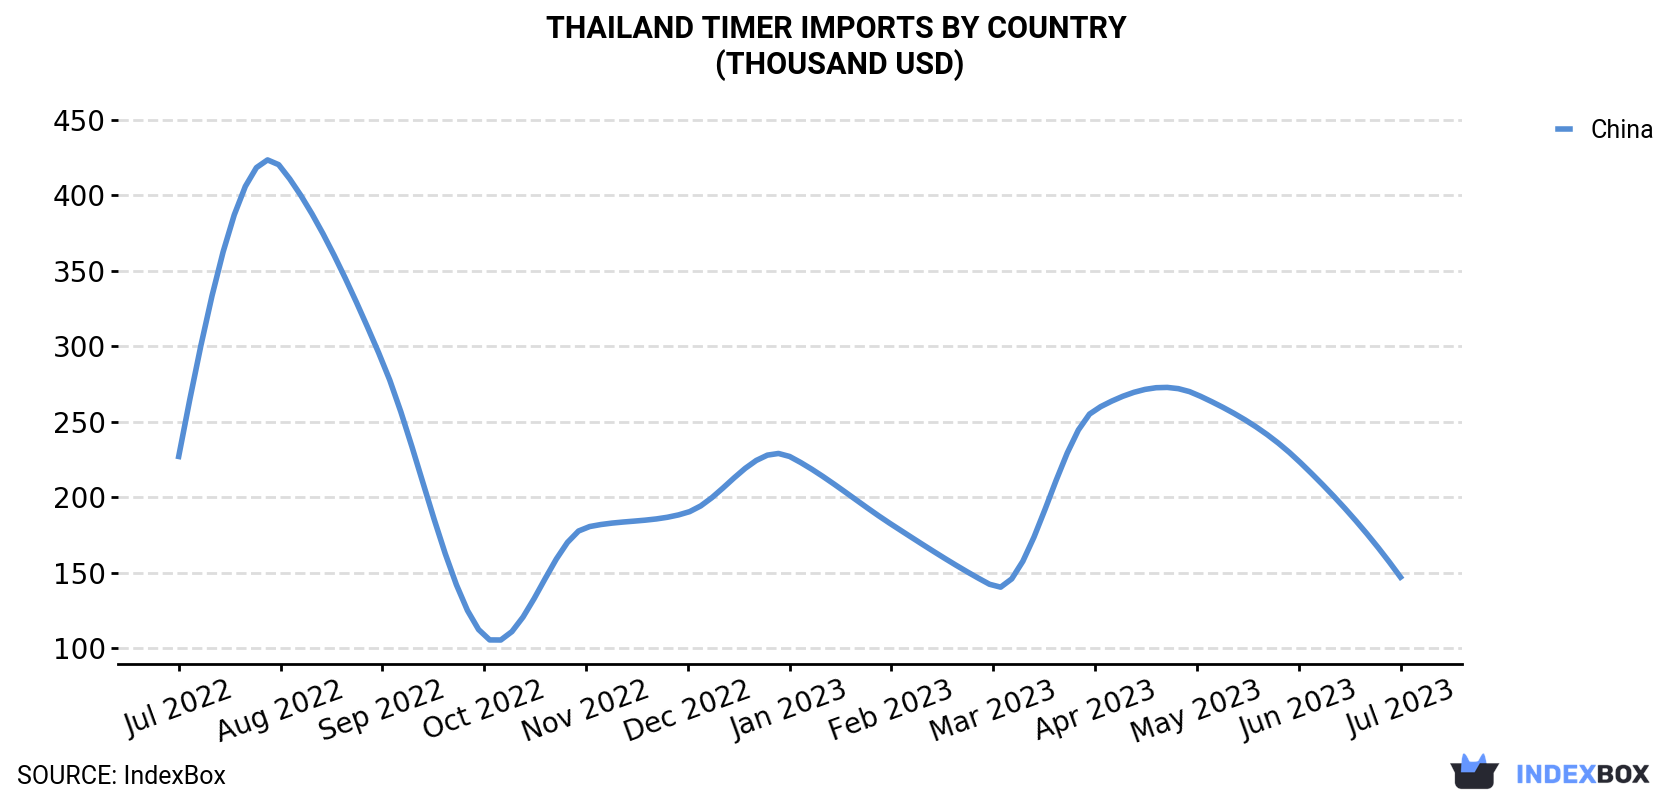 Thailand Timer Imports By Country (Thousand USD)